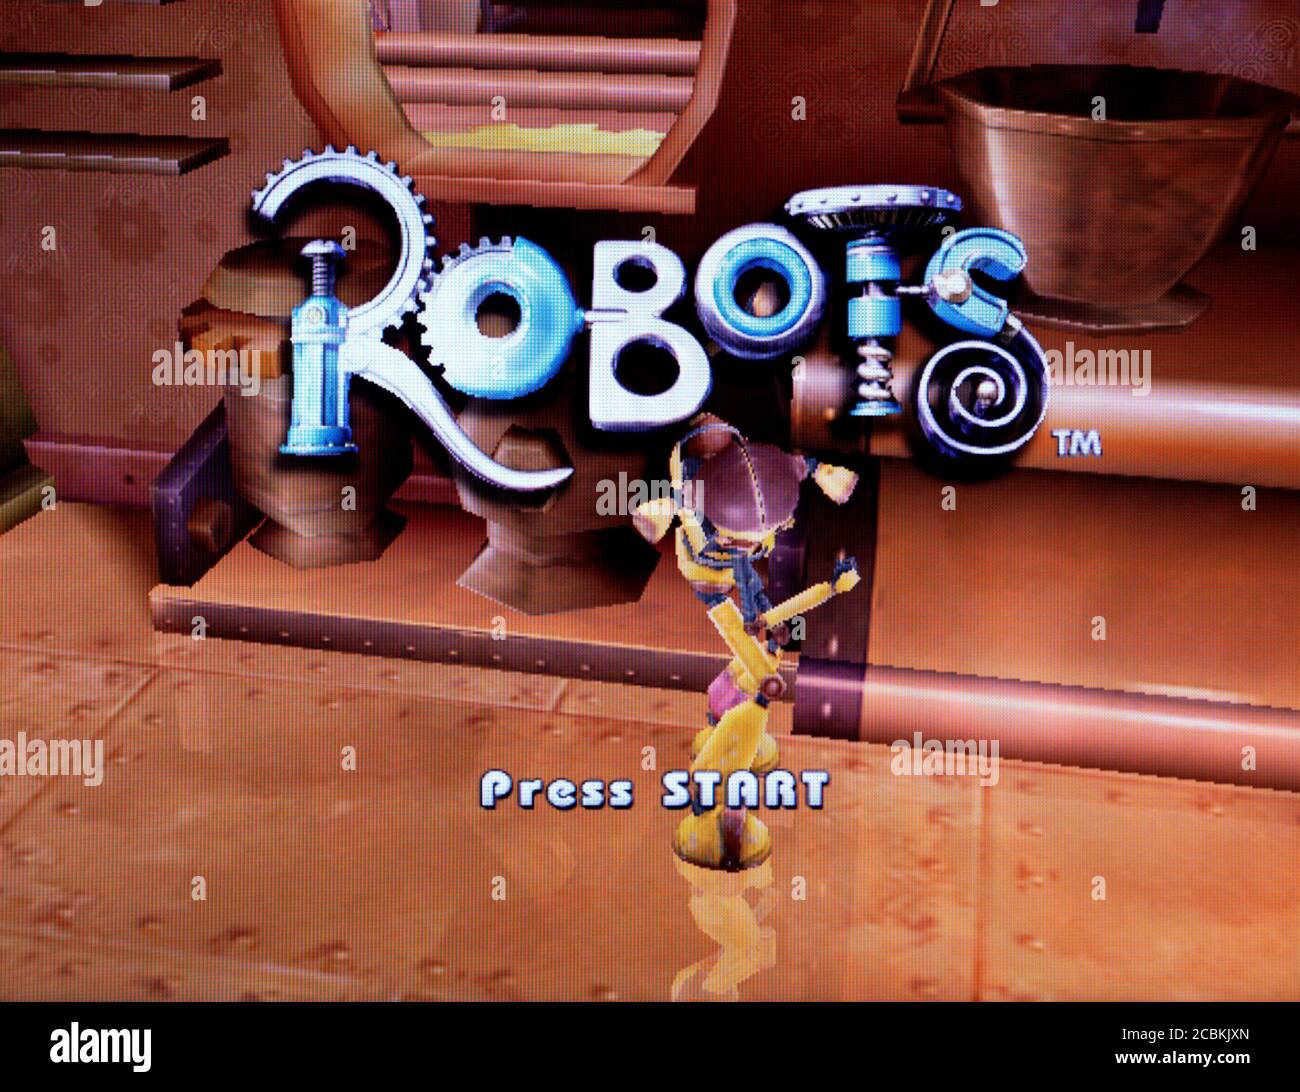 Robots - Nintendo Gamecube Videogame - Editorial use only Stock Photo